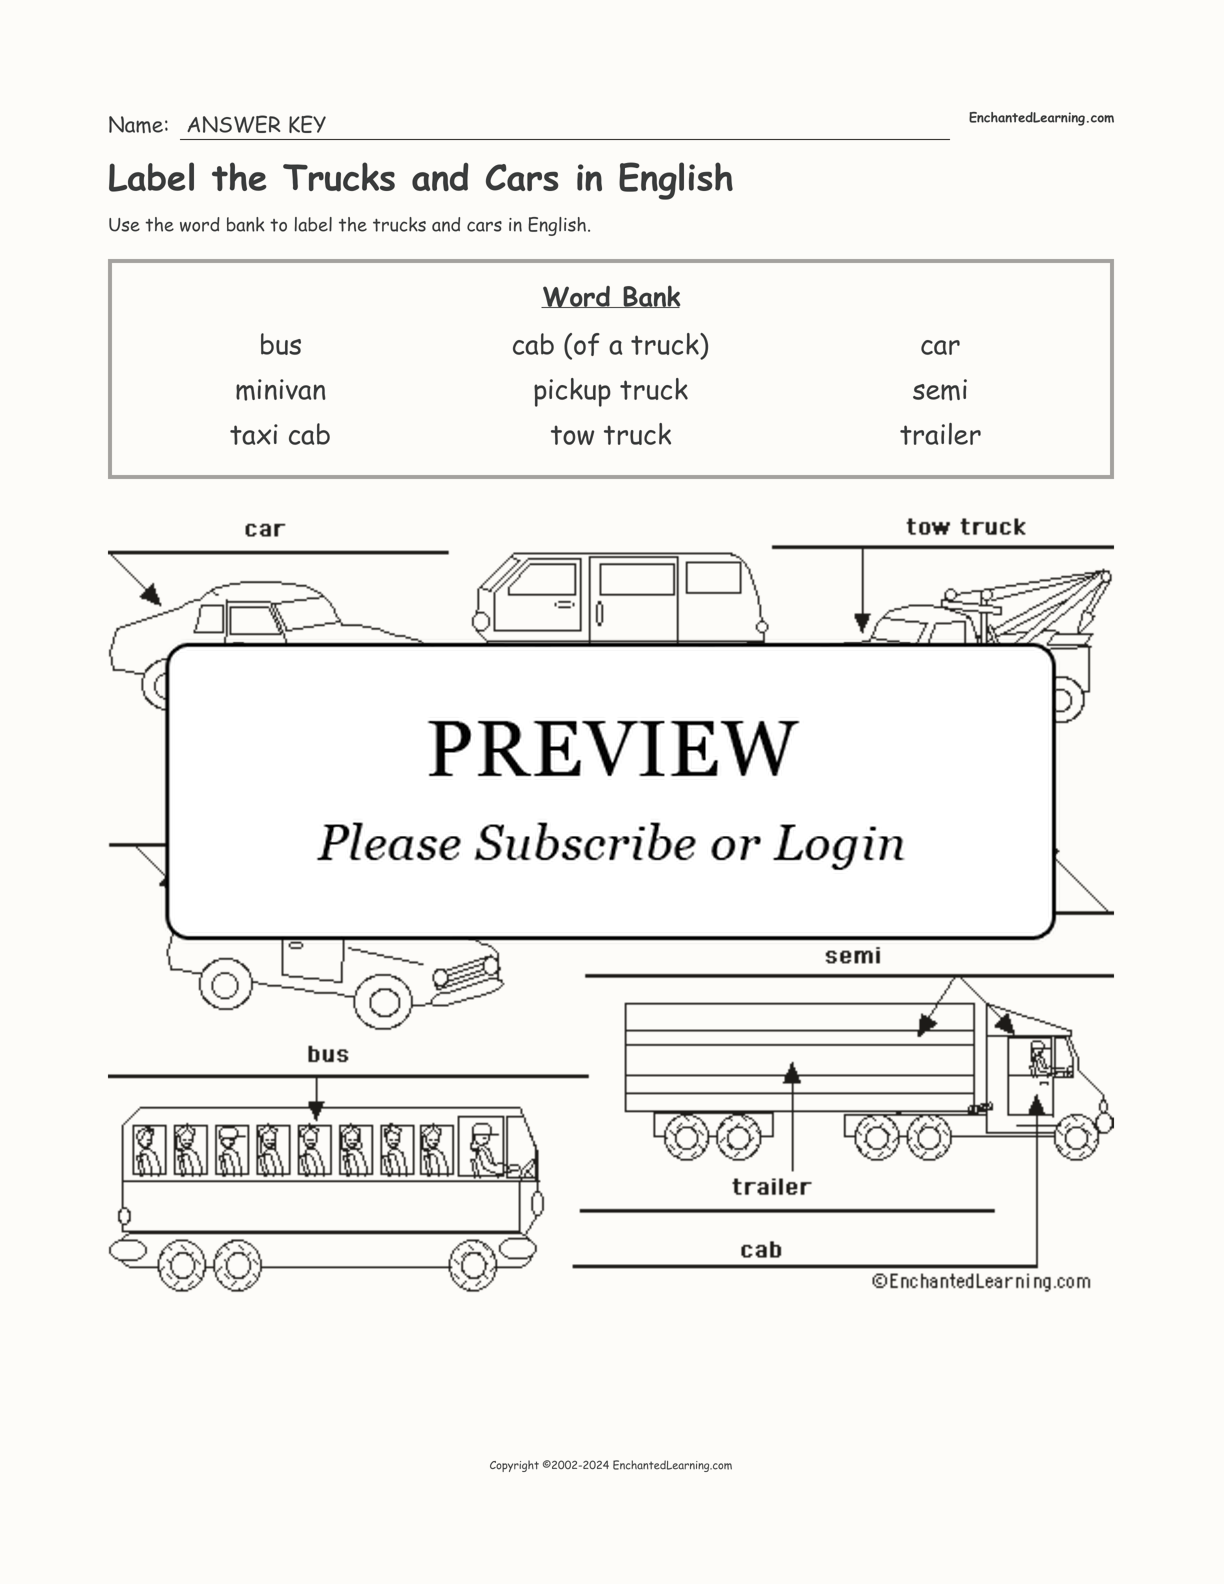 Label the Trucks and Cars in English interactive worksheet page 2